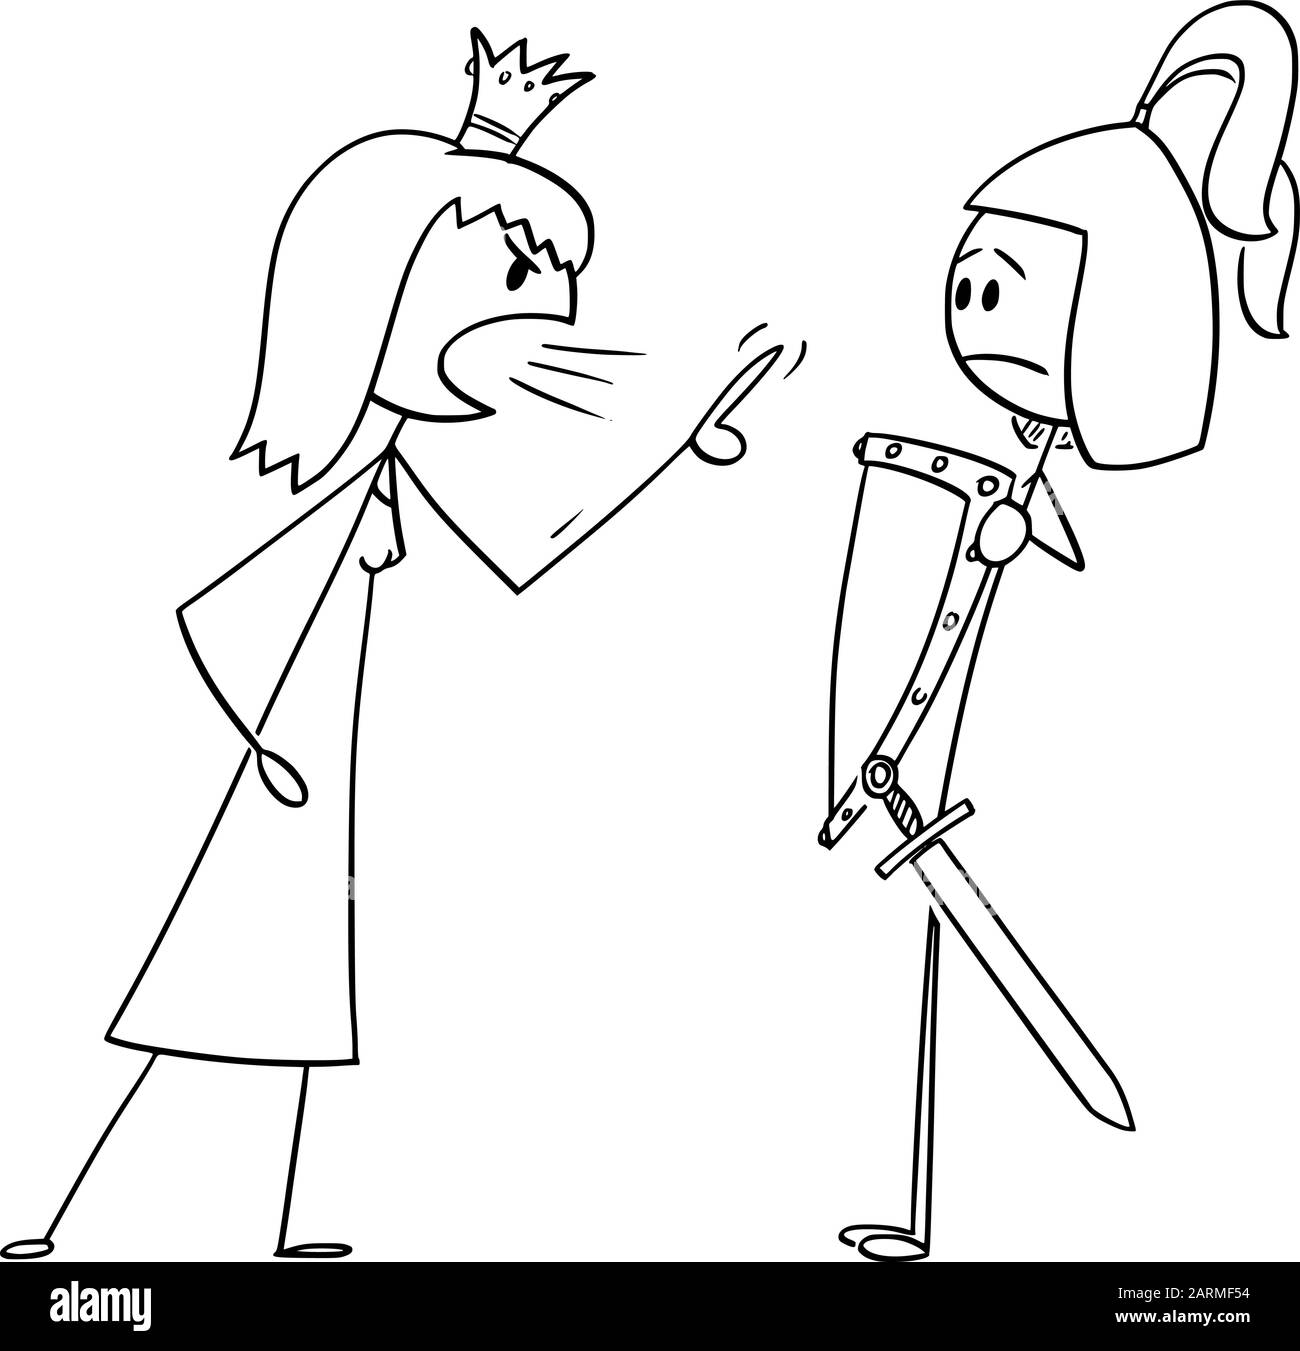 Vector cartoon stick figure drawing conceptual illustration of princess or queen yelling angry at prince or warrior in armor. Concept of relationship problem. Stock Vector